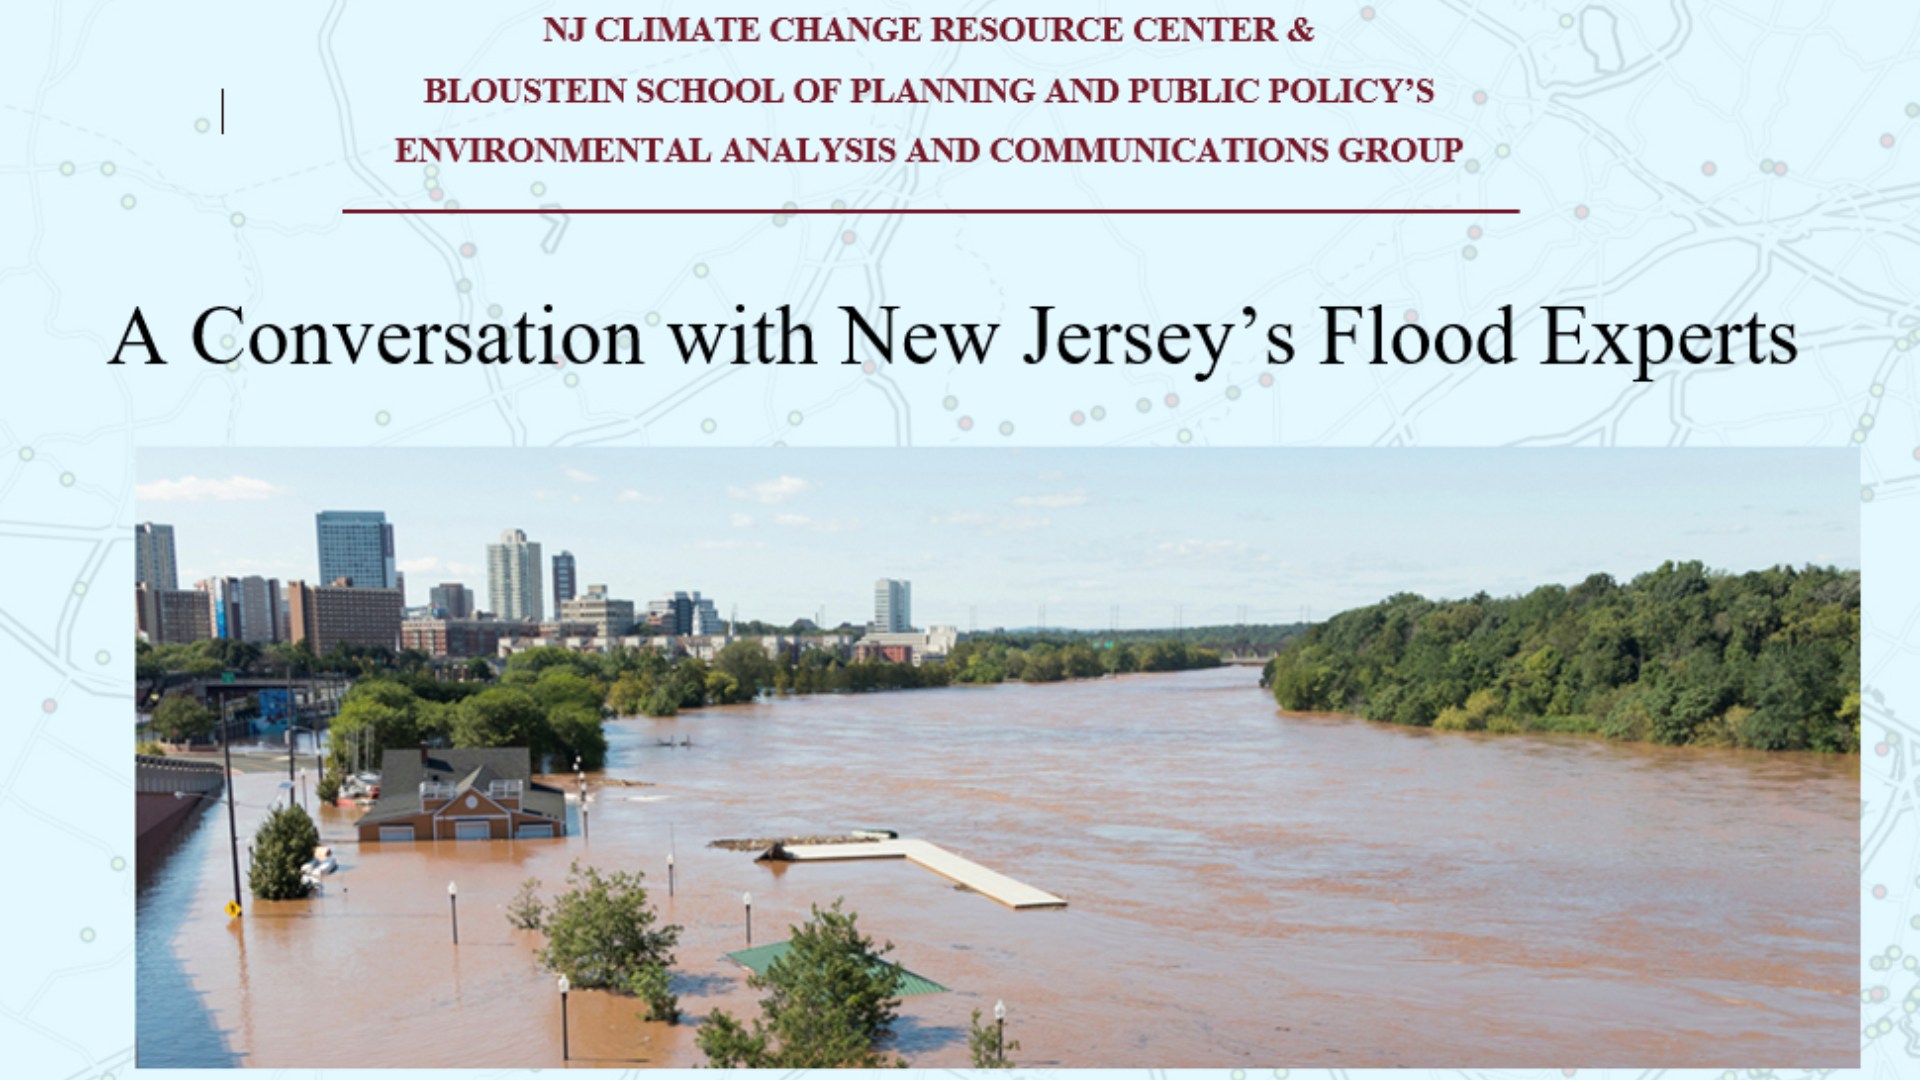 A Conversation with new Jersey's Flood Experts